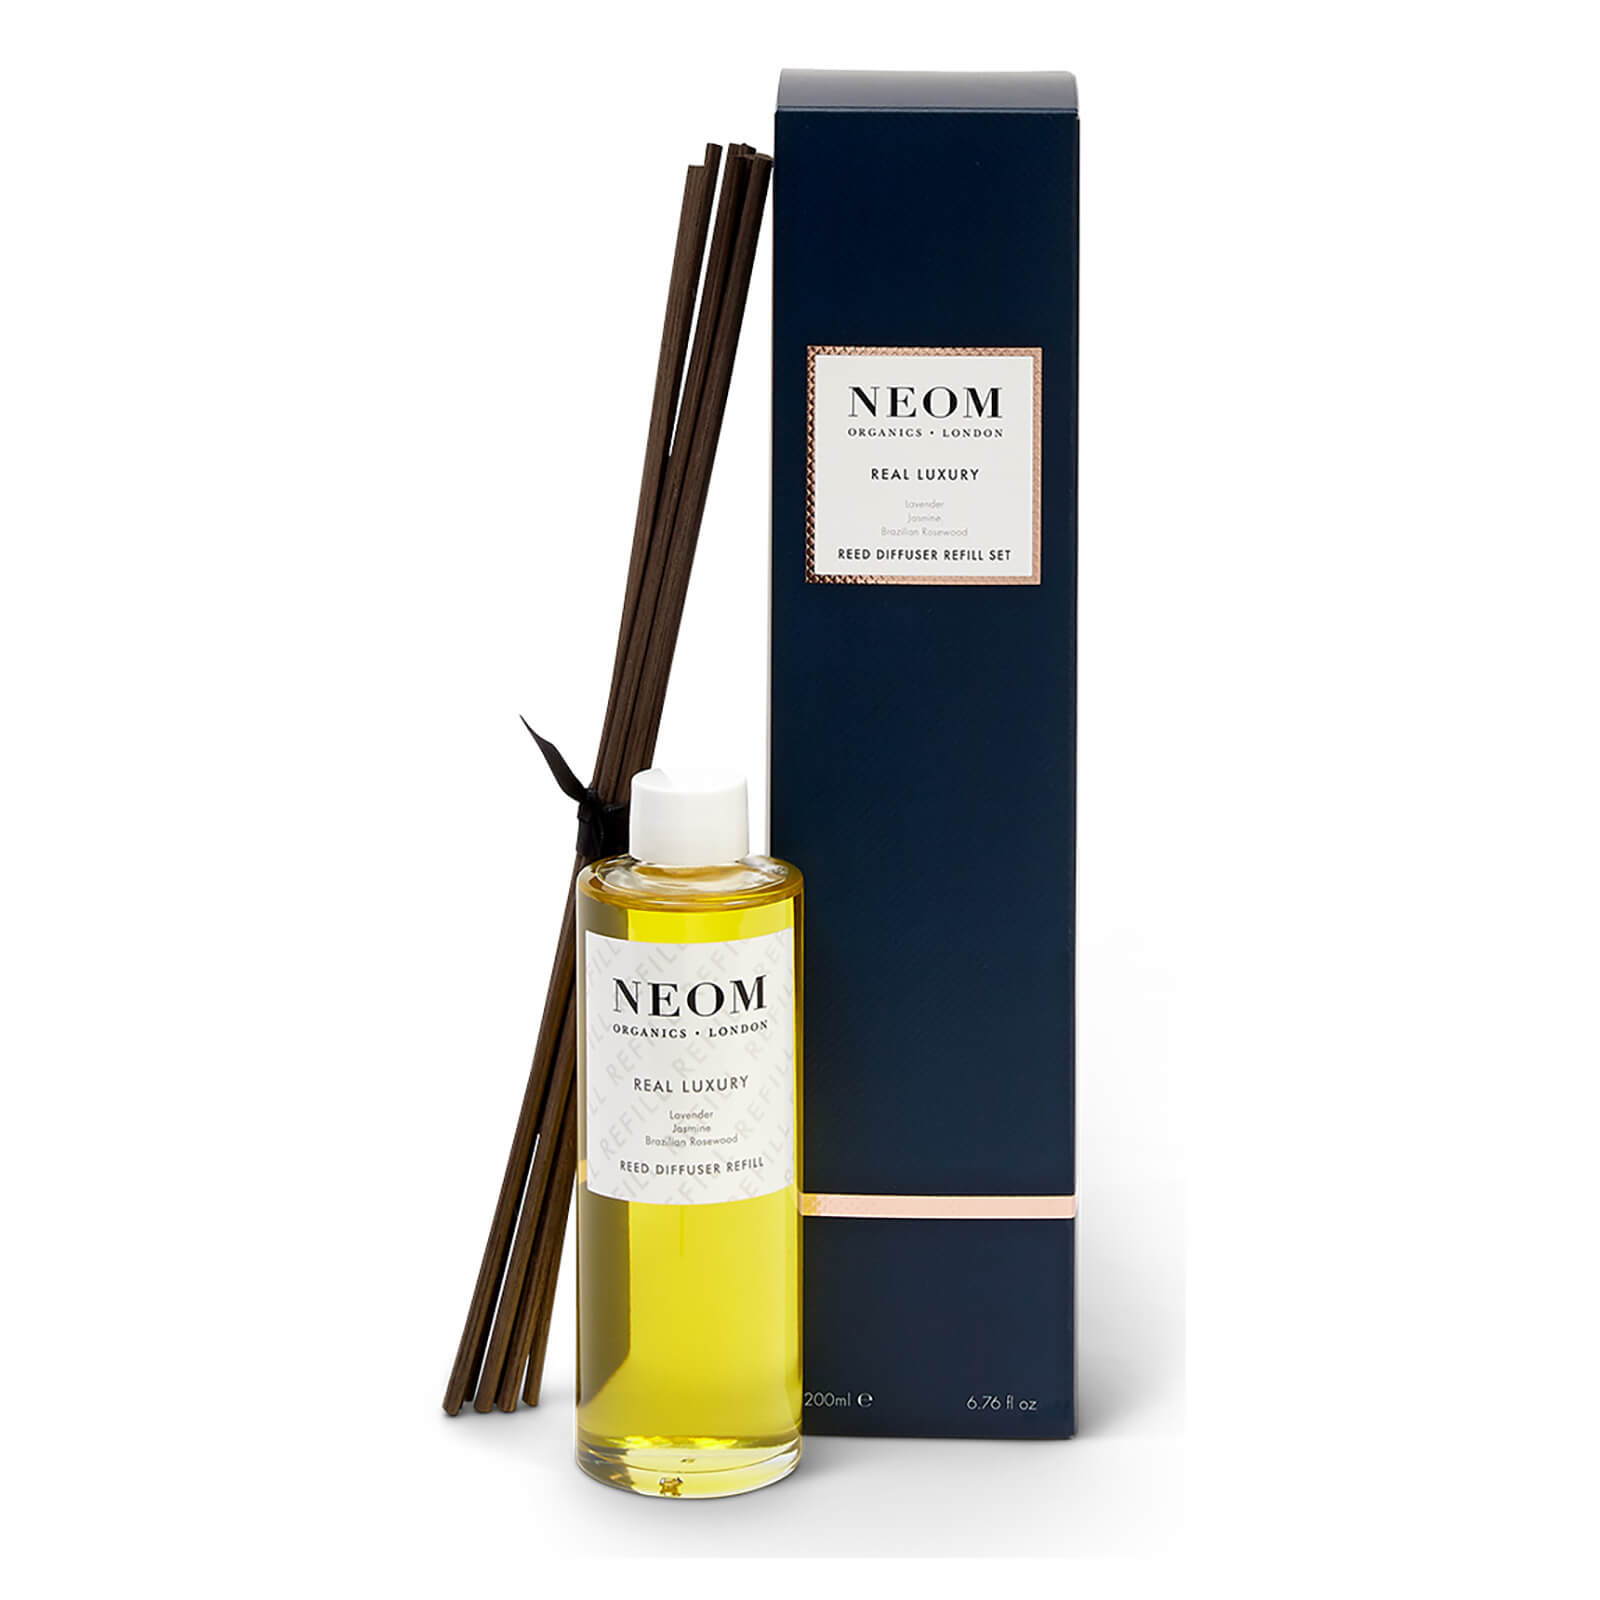 NEOM Organics London Real Luxury Ultimate Reed Diffuser Refill